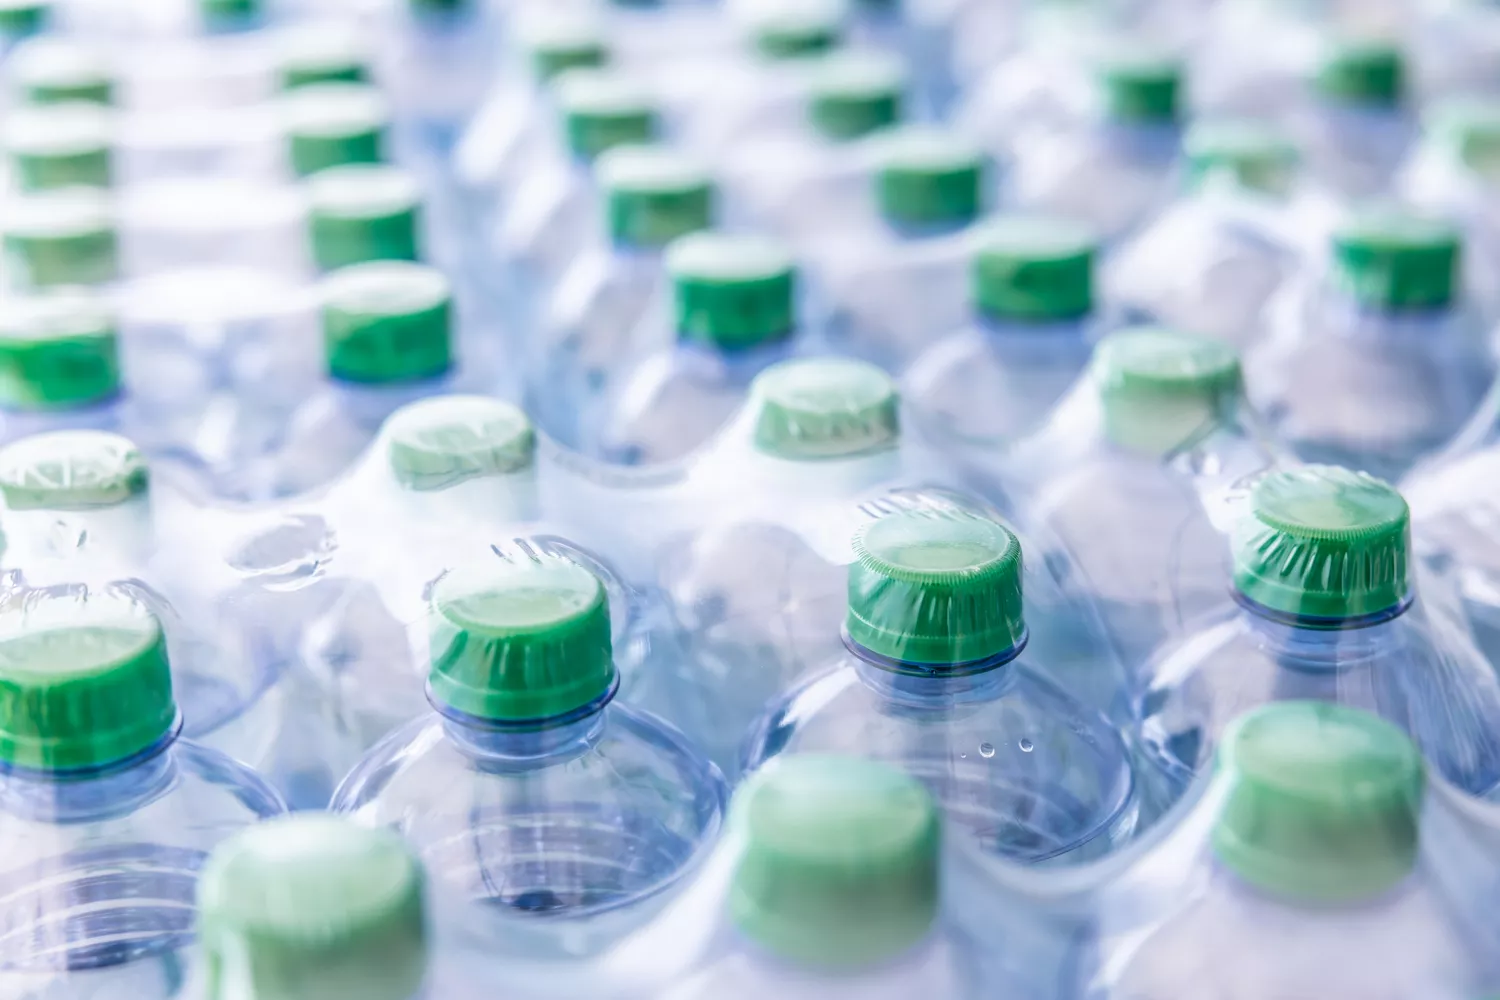 Scientists Say They'll Cut Back on Bottled Water After Learning 1 Liter Contains a Quarter of a Million Pieces of Plastic